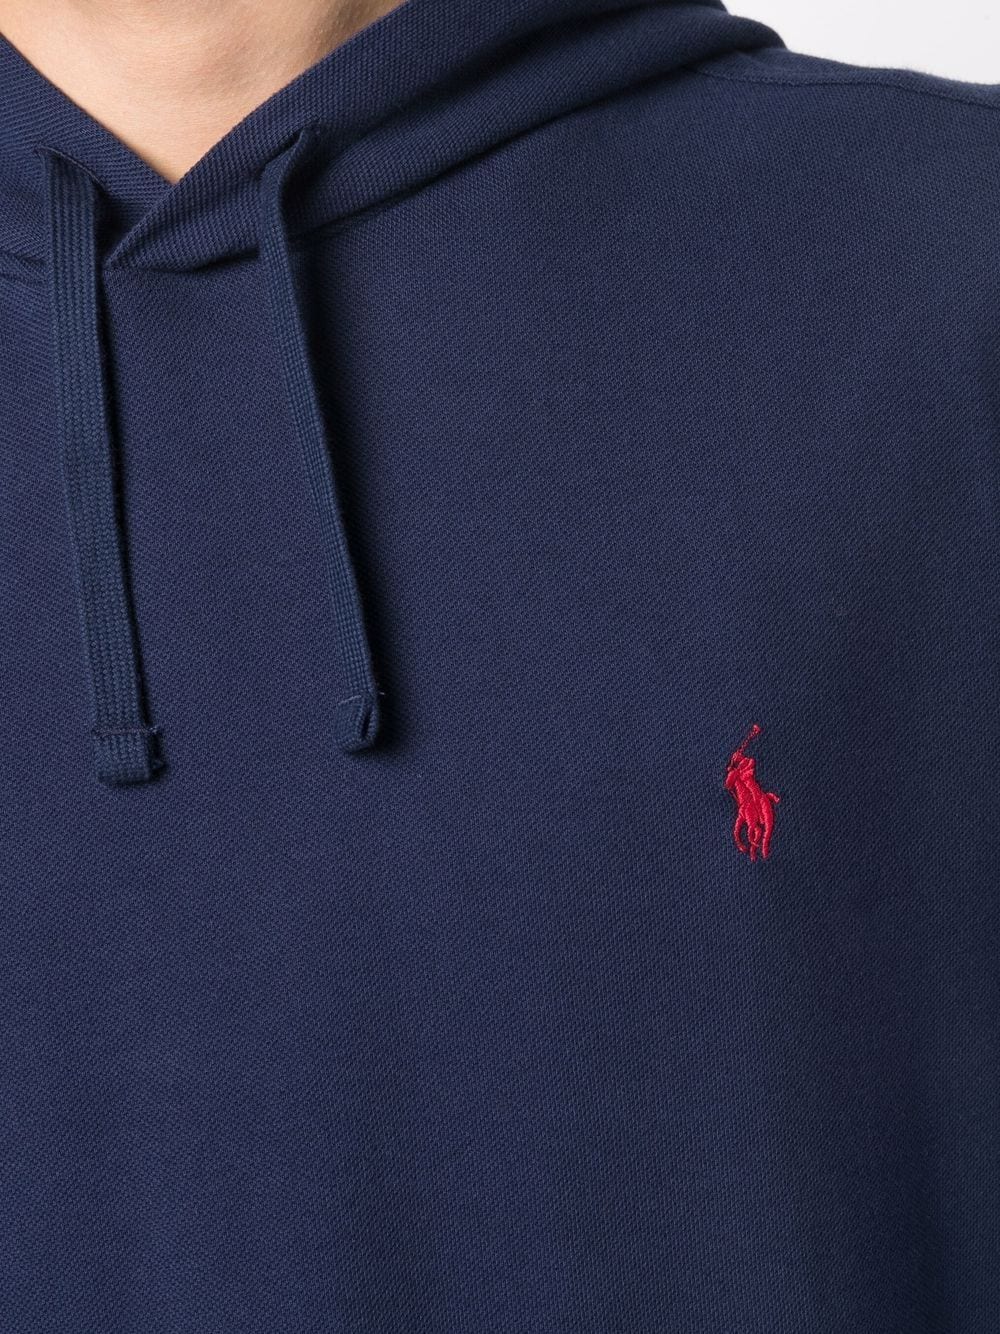 Polo Ralph Lauren embroidered-logo Pullover Hoodie - Farfetch